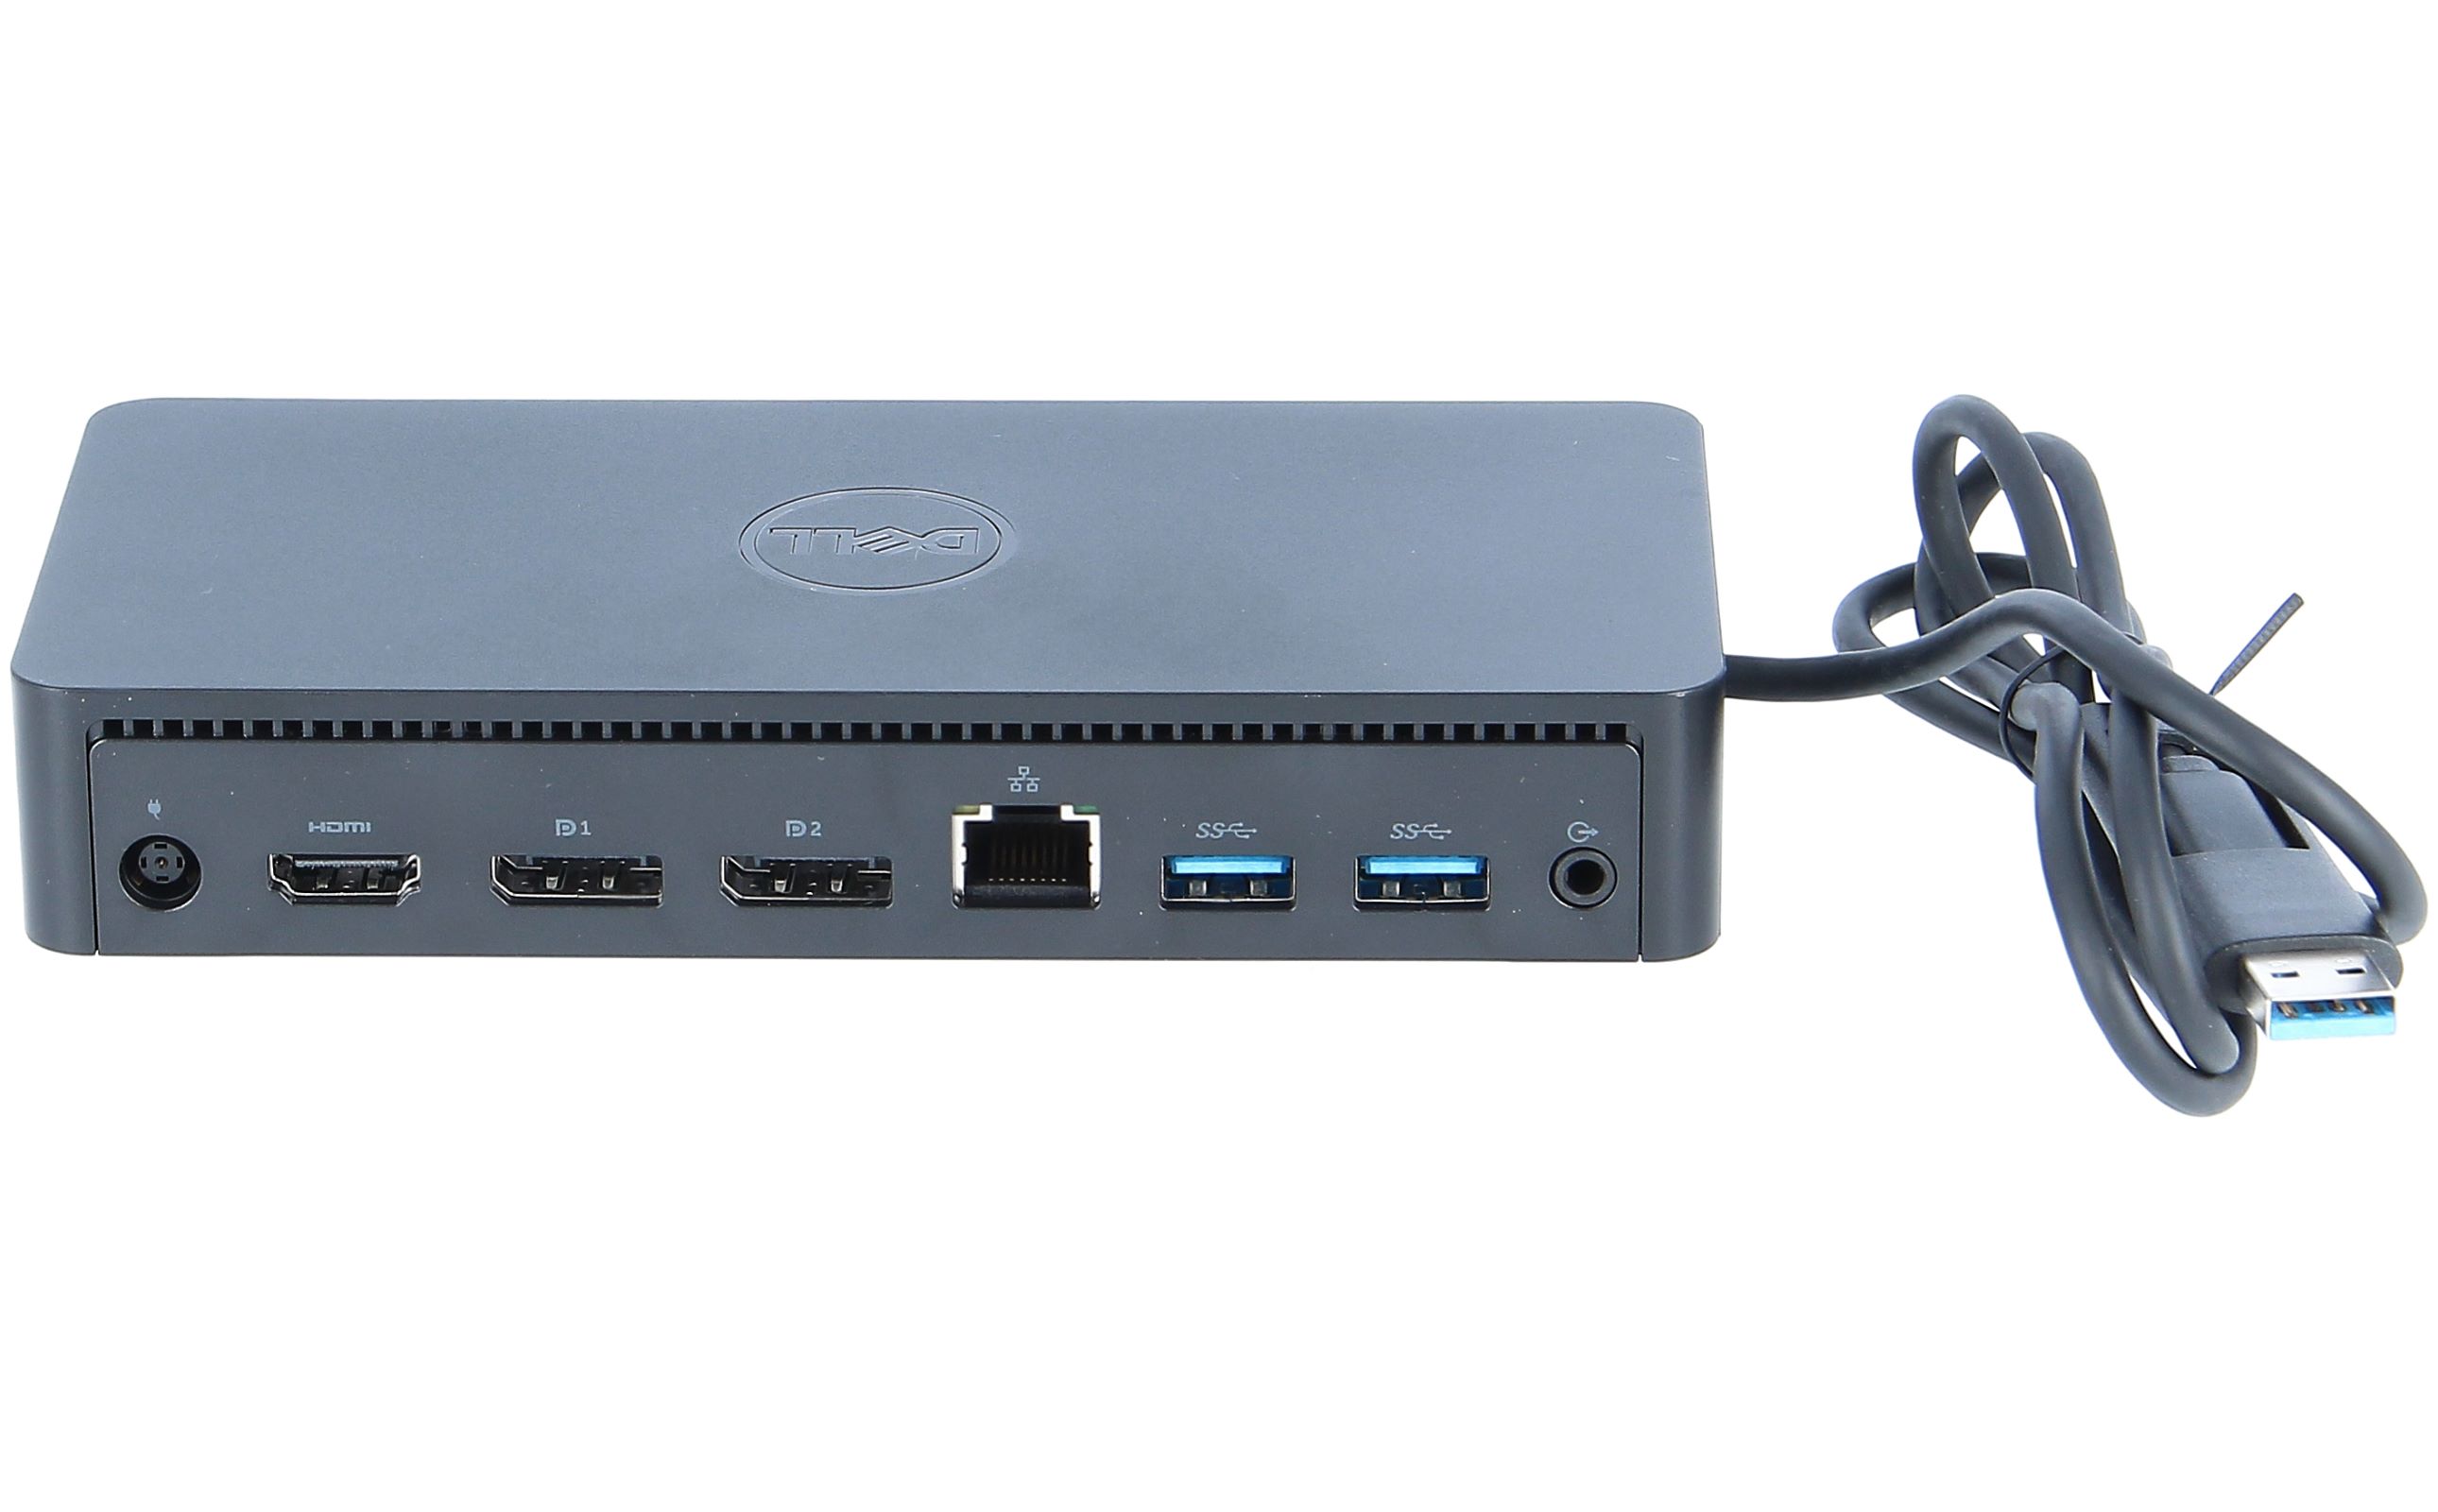 How To Connect Dell D3100 Docking Station To Laptop | CellularNews